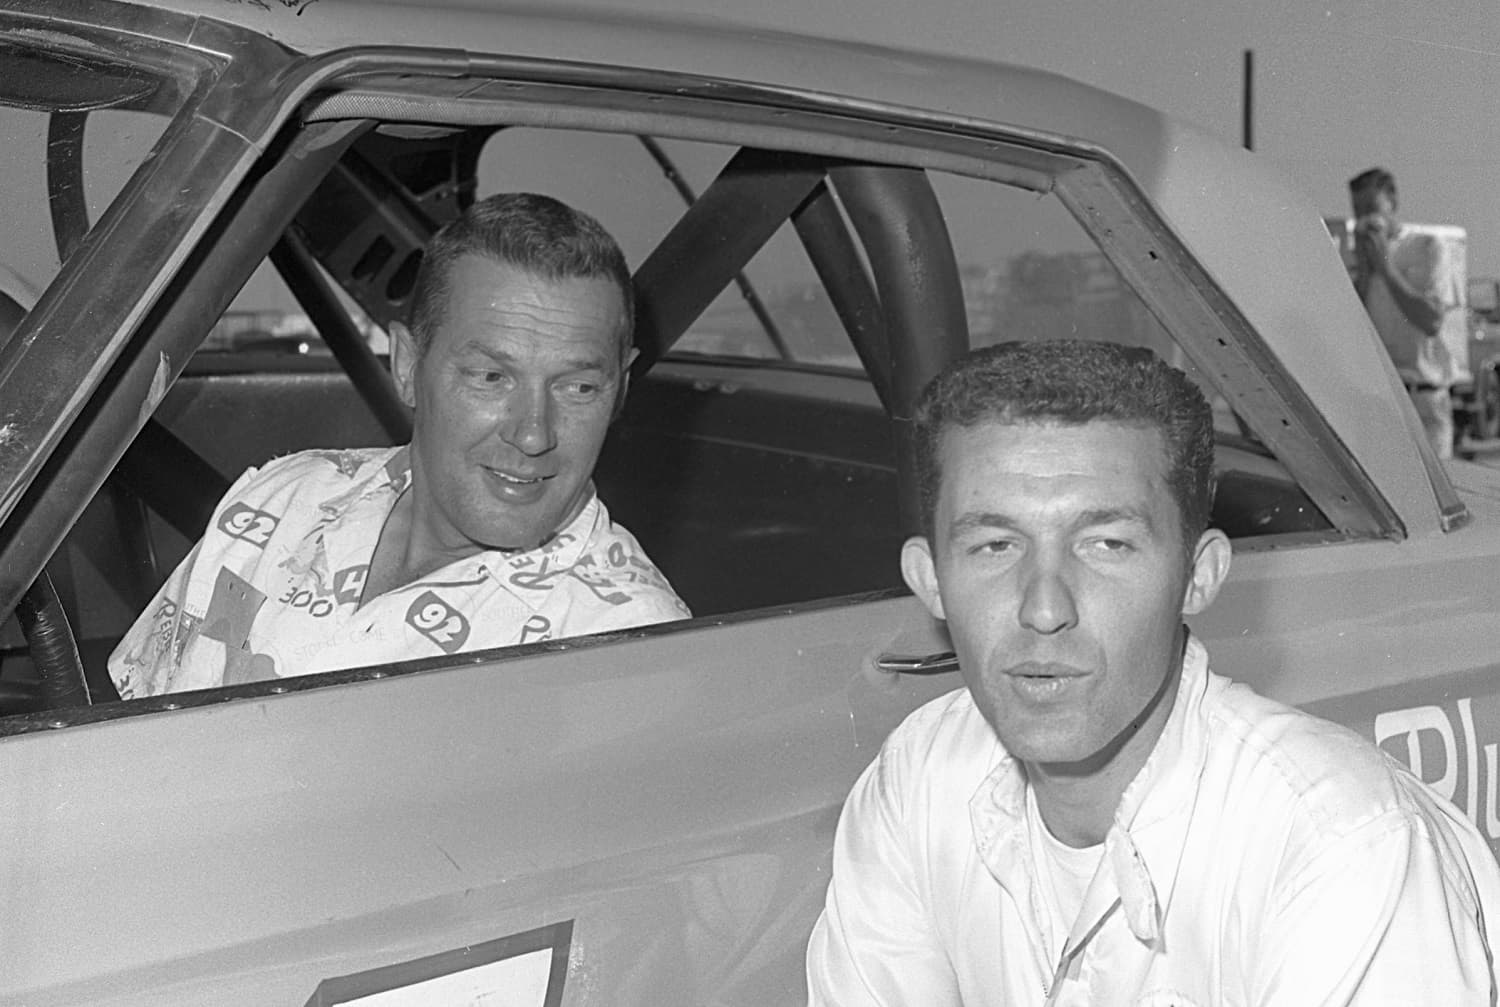 Jim Paschal (in car) and Richard Petty pose for a photo during the 1965 NASCAR season. Petty Enterprises hired Paschal to drive in three races, and he responded by finishing no worse than fifth.|  ISC Images & Archives via Getty Images